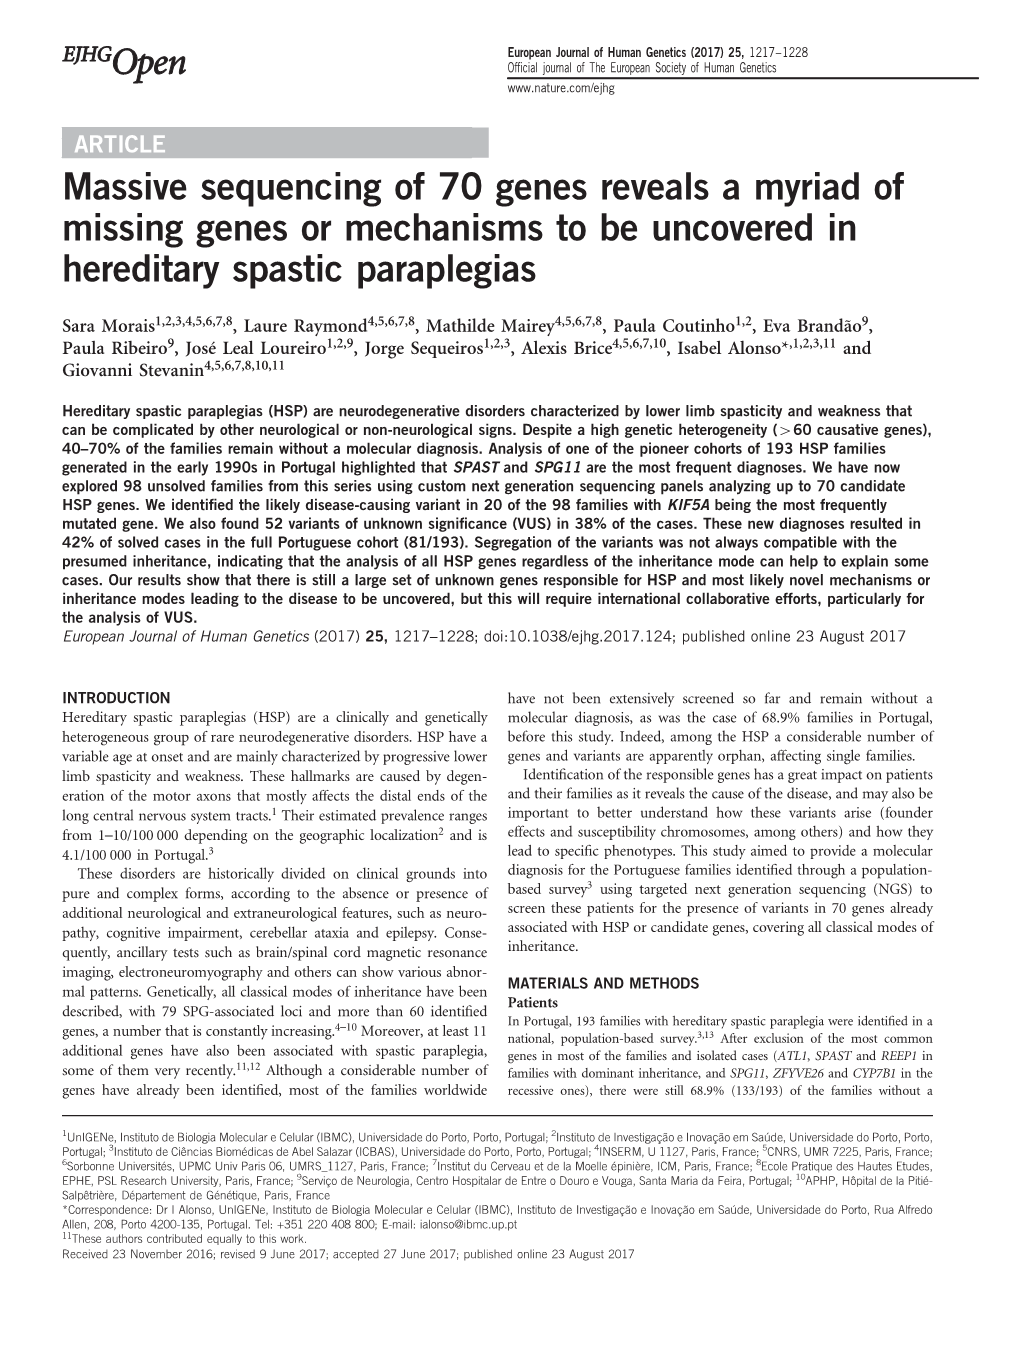 Massive Sequencing of 70 Genes Reveals a Myriad of Missing Genes Or Mechanisms to Be Uncovered in Hereditary Spastic Paraplegias